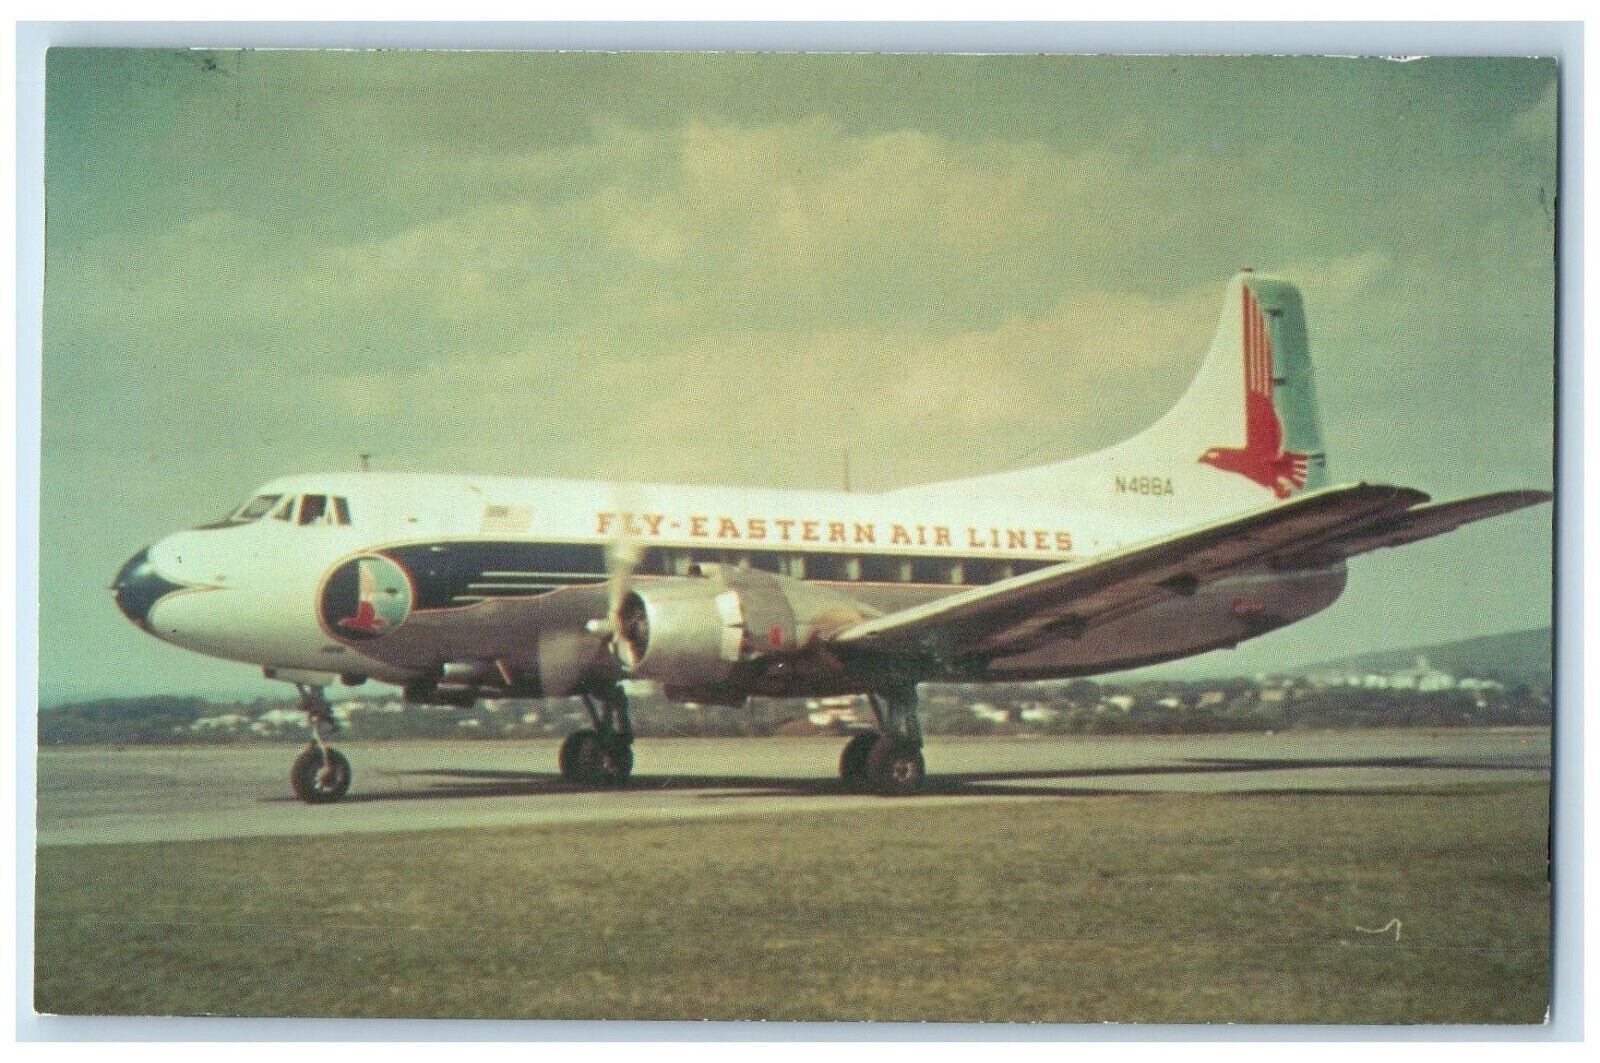 c1960\'s Fly Eastern Air Lines M-404 Airplane #472 Historical Aircraft Postcard